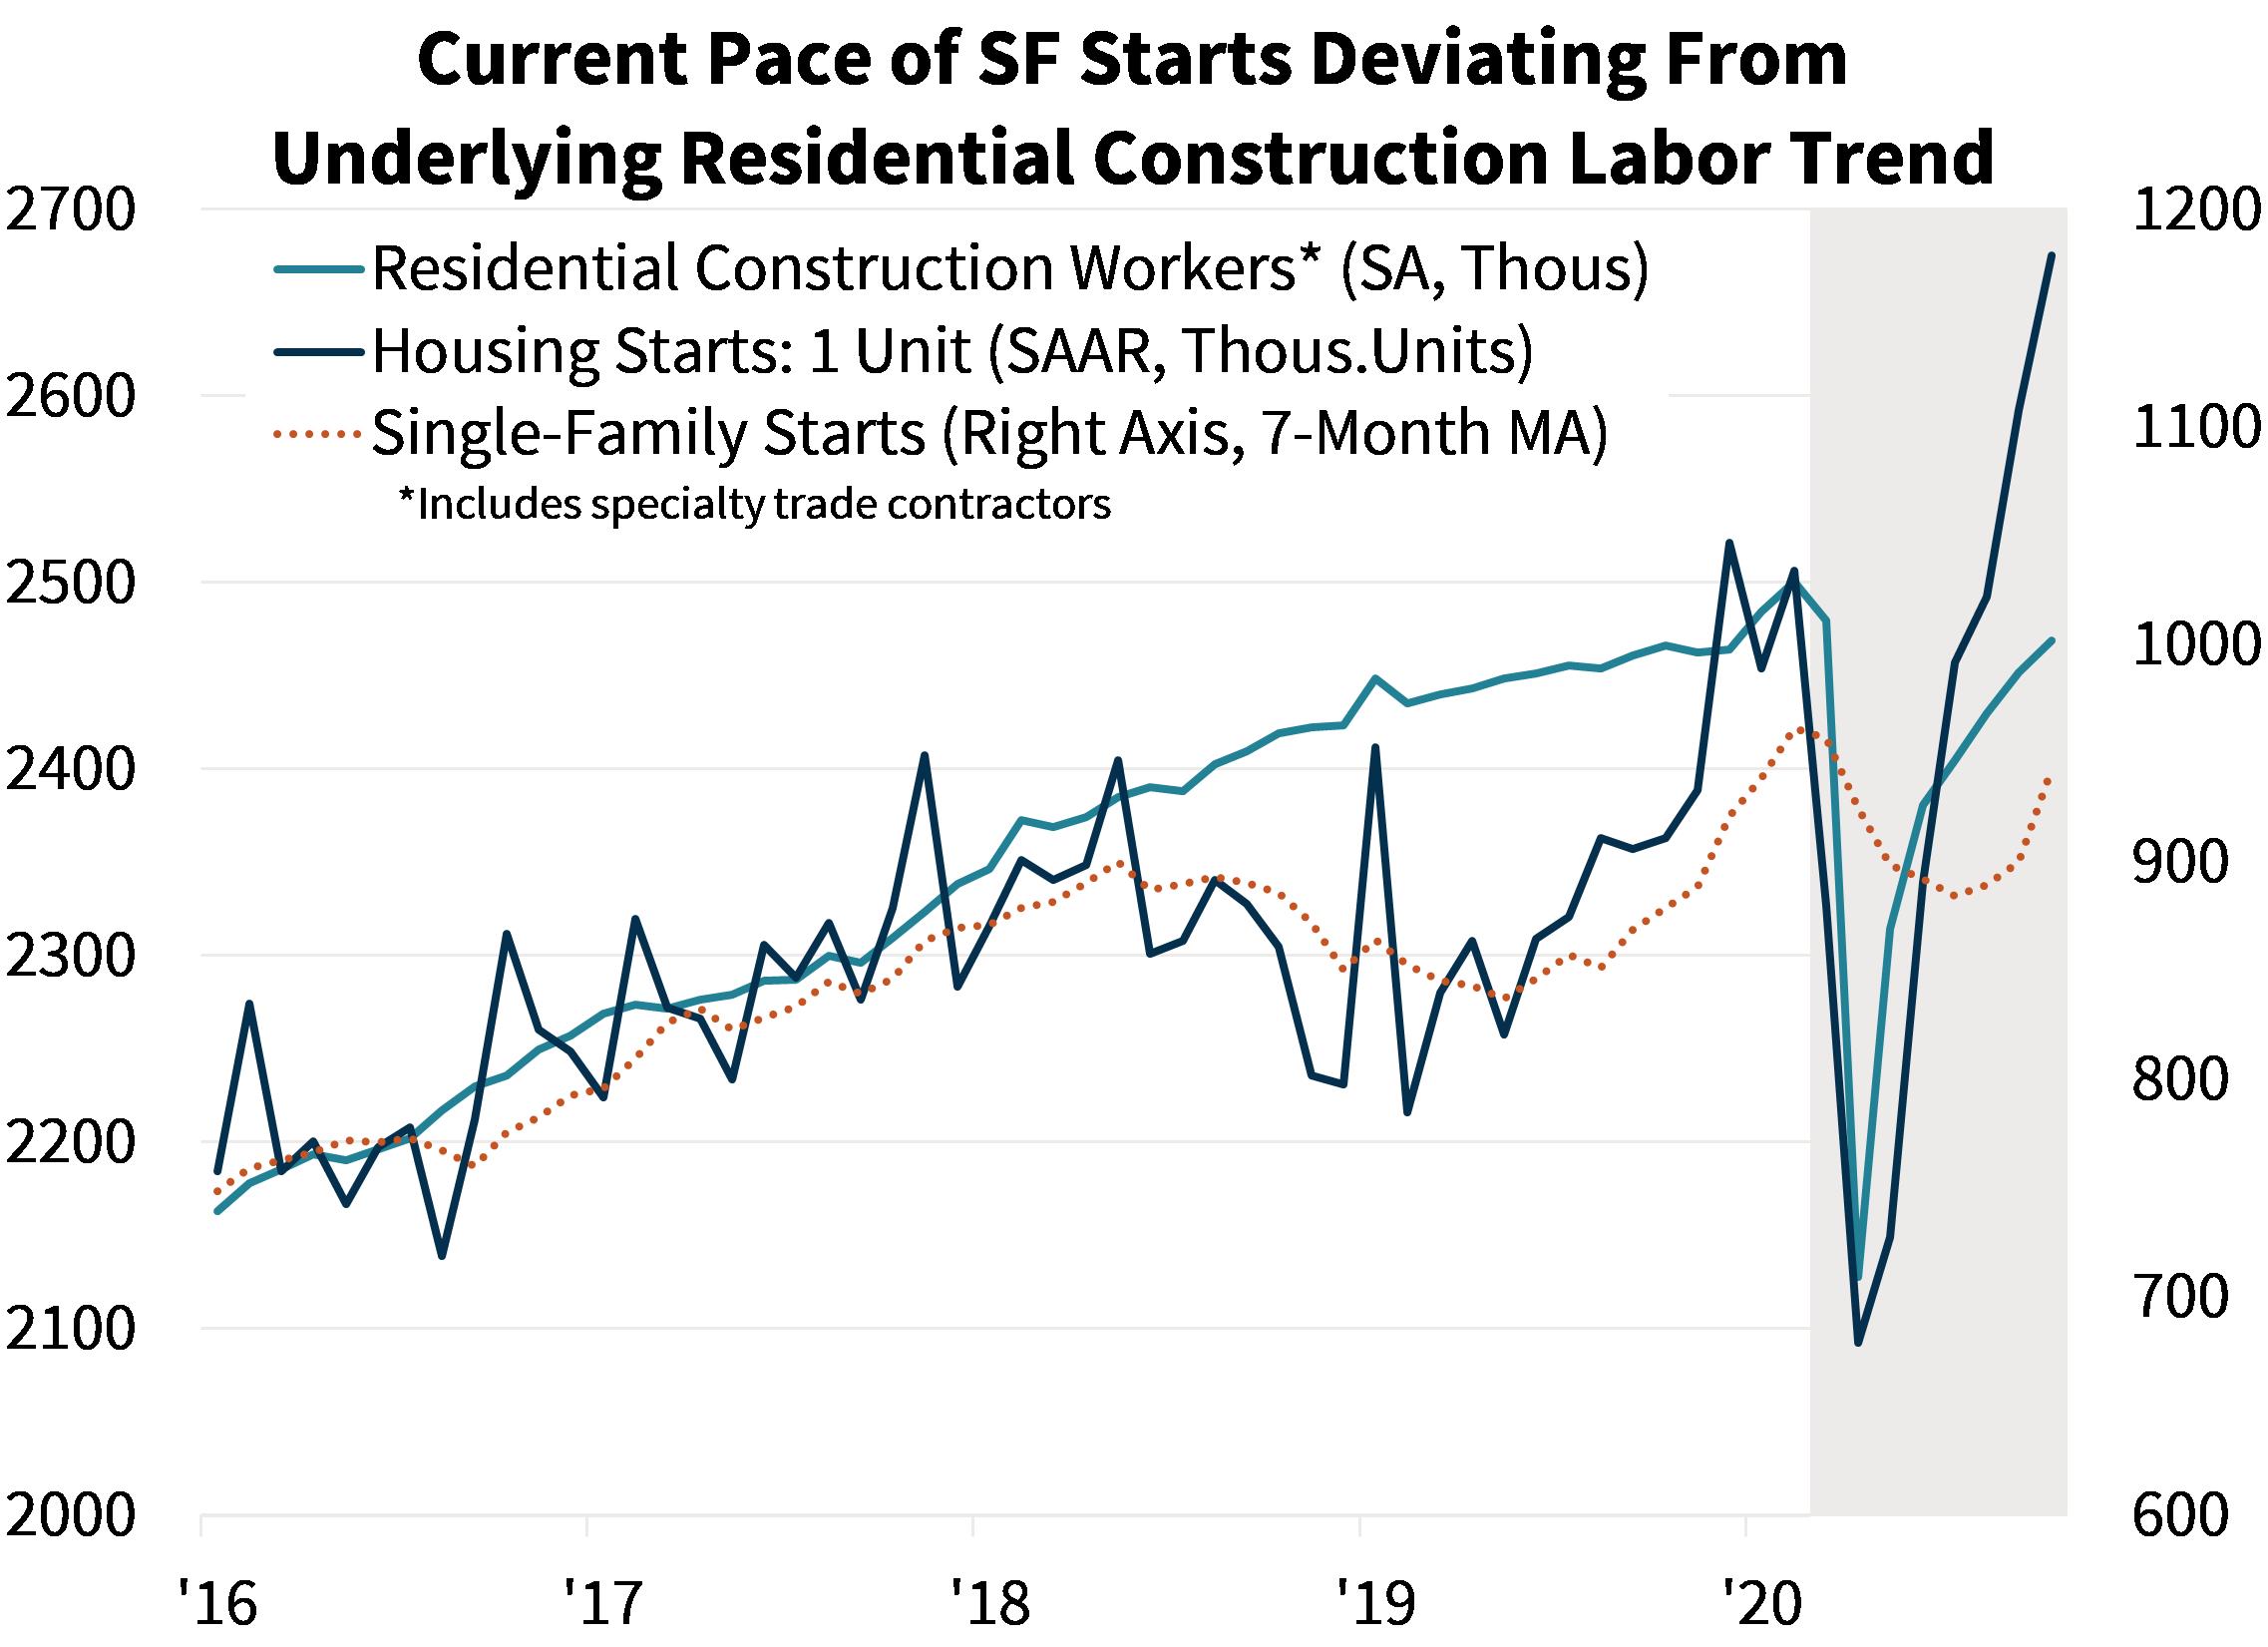  Current Pace of SF Starts Deviating From Underlying Residential Construction Labor Trends
